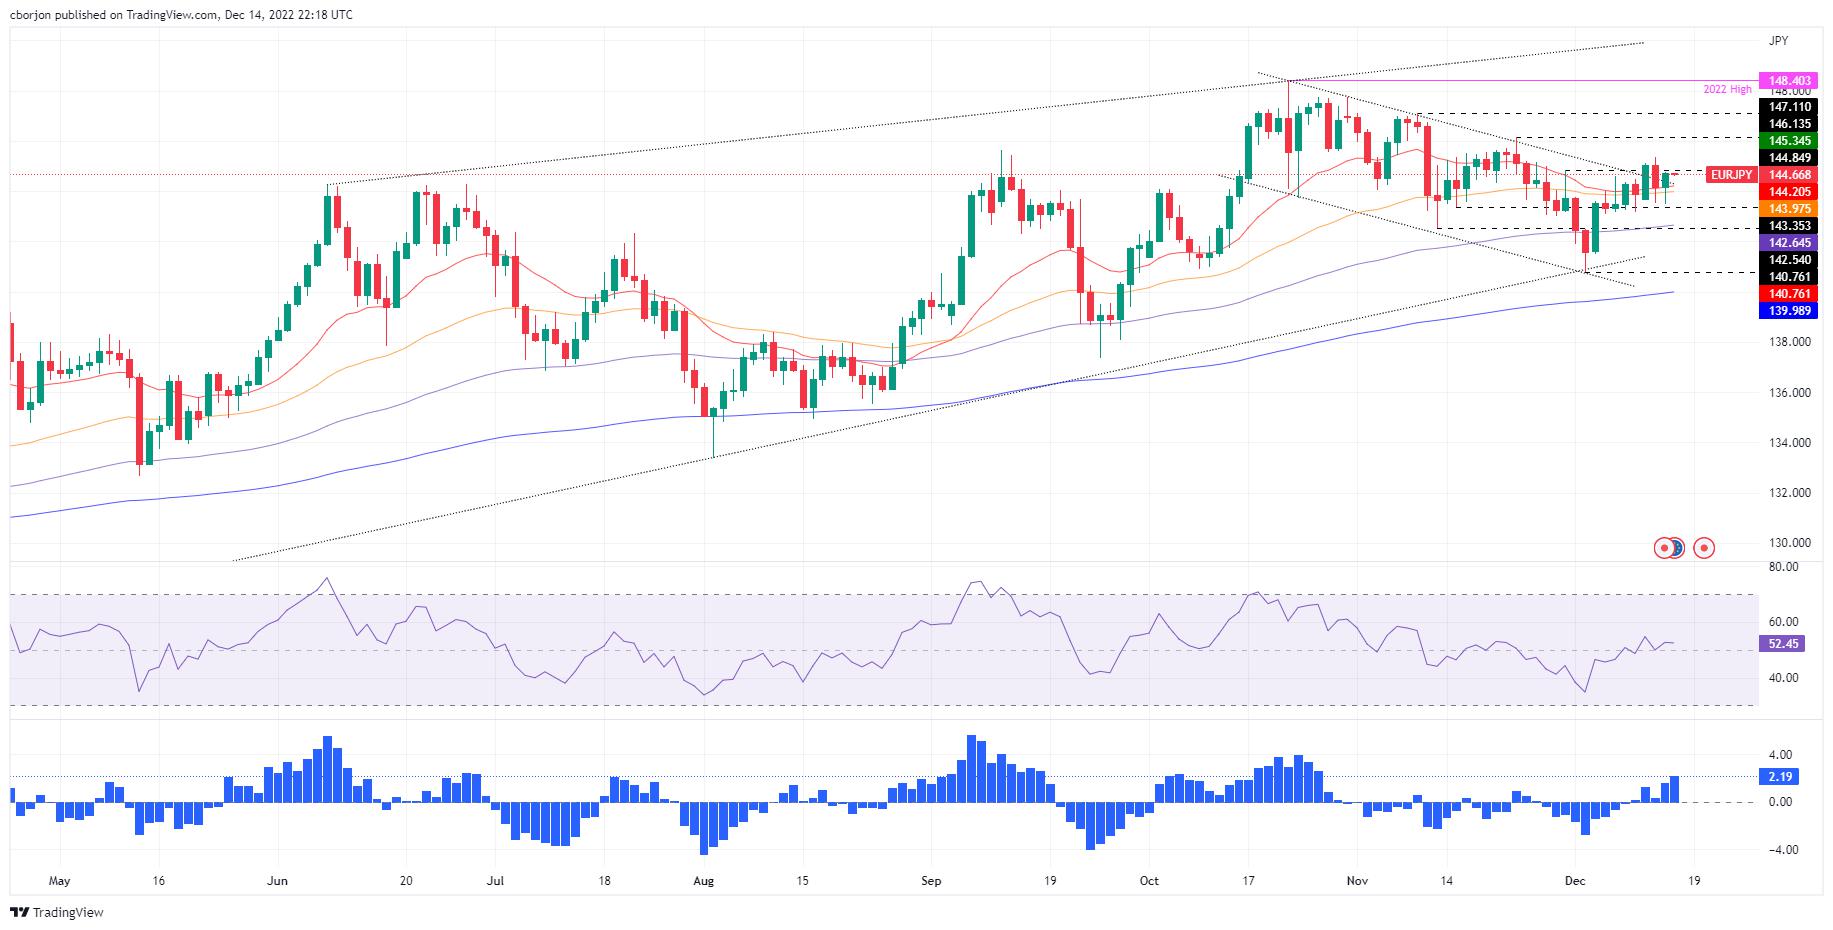 EUR/JPY Price Analysis: Fluctuates around 144.60s after piercing the 20/50-day EMAs